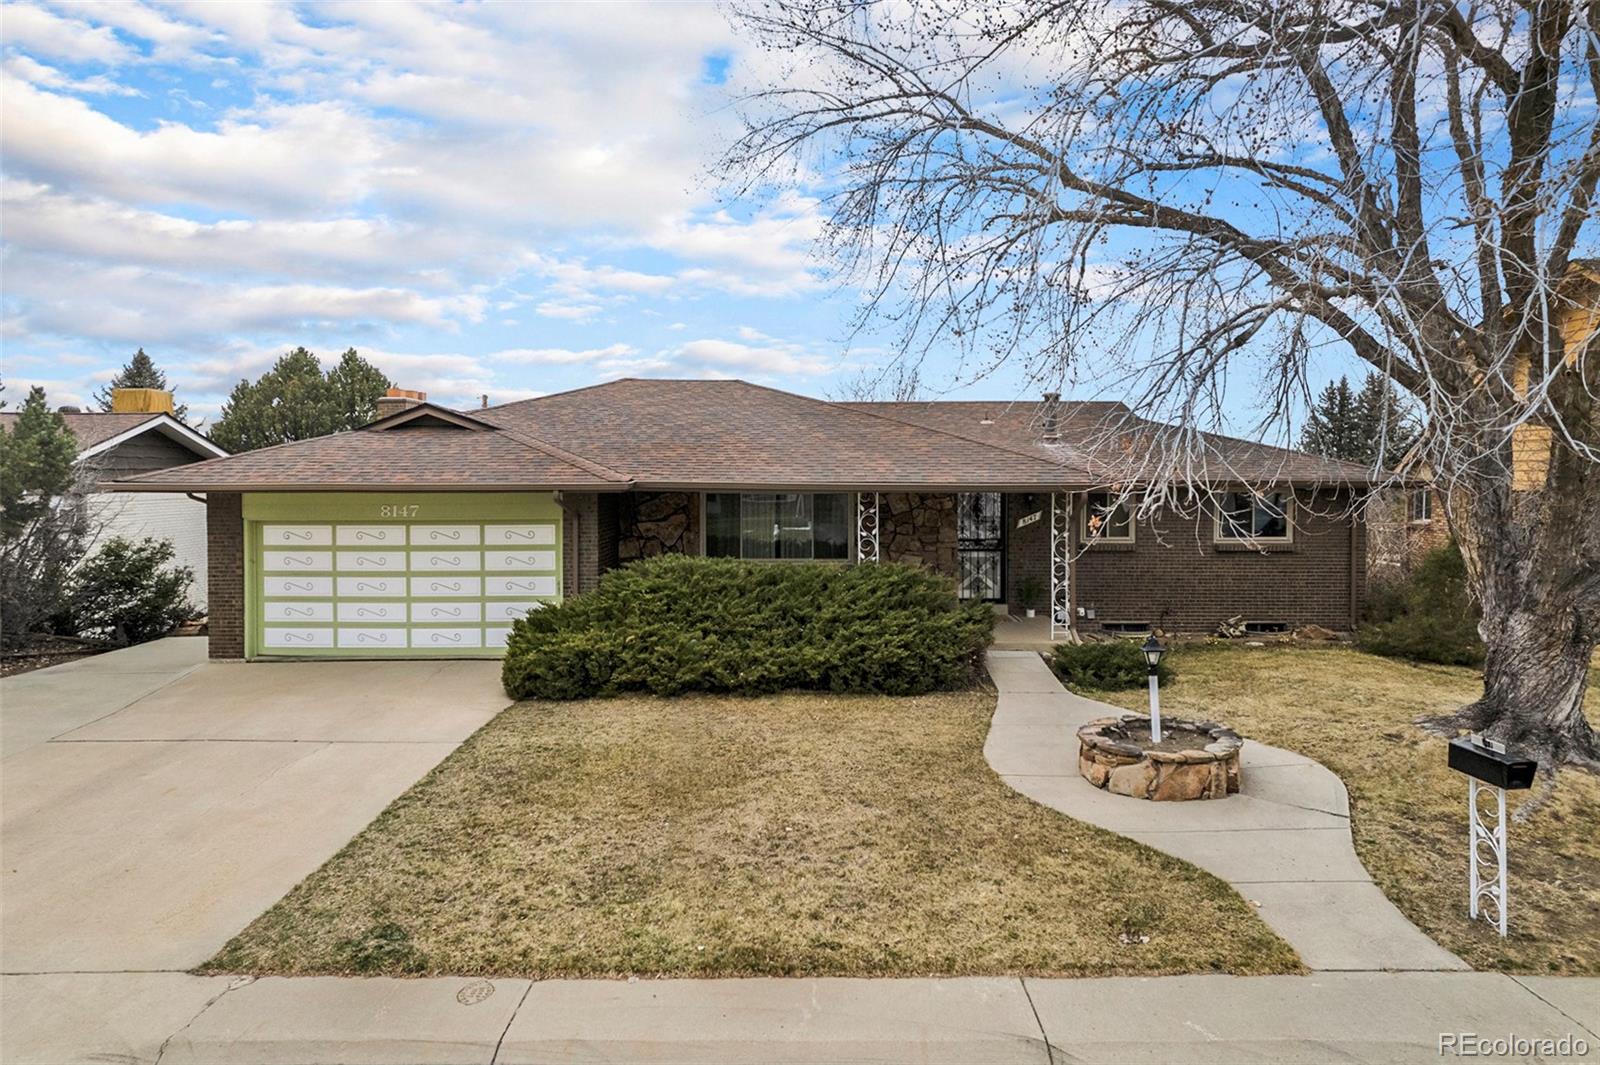 8147 w 71st place, Arvada sold home. Closed on 2024-04-03 for $762,500.